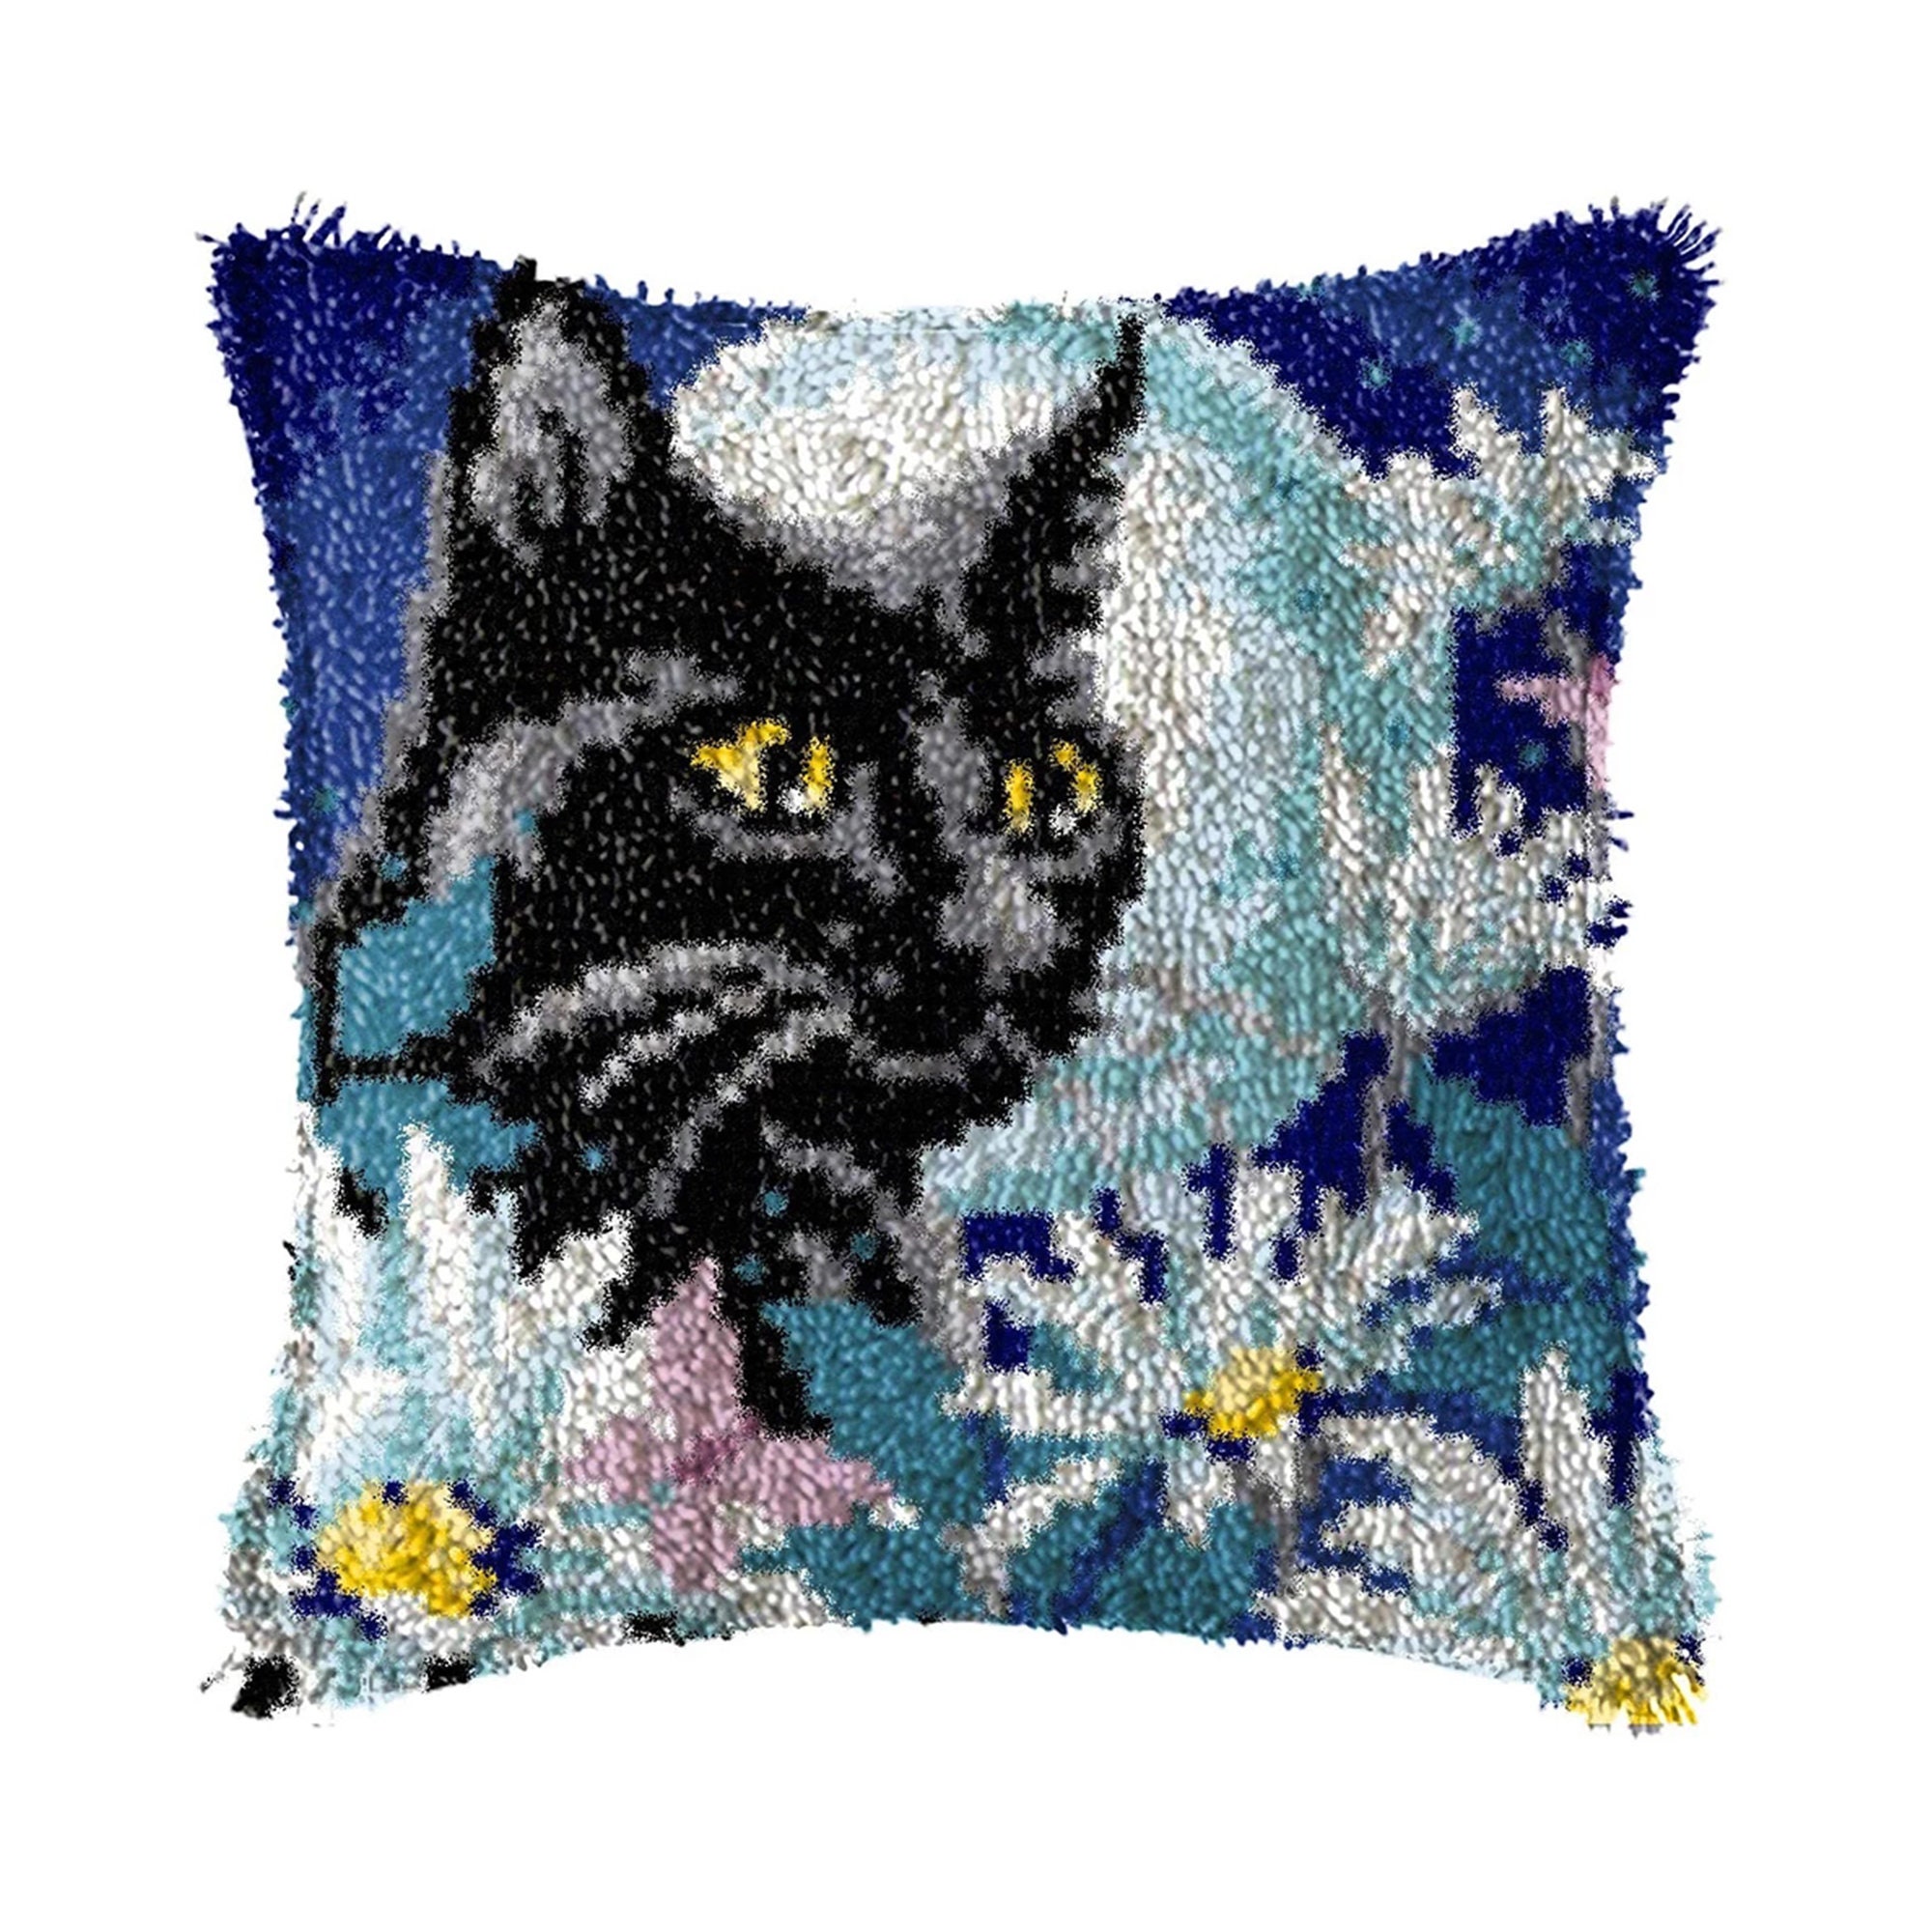 VECANCE Cat Latch Hook Kits DIY Throw Pillow Cover Rug Cute Kitten Pattern Printed Pet Pillowcase Embroidery Needlework Craft for Home Decoration BZ-263 16.9 X 16.9 inch 